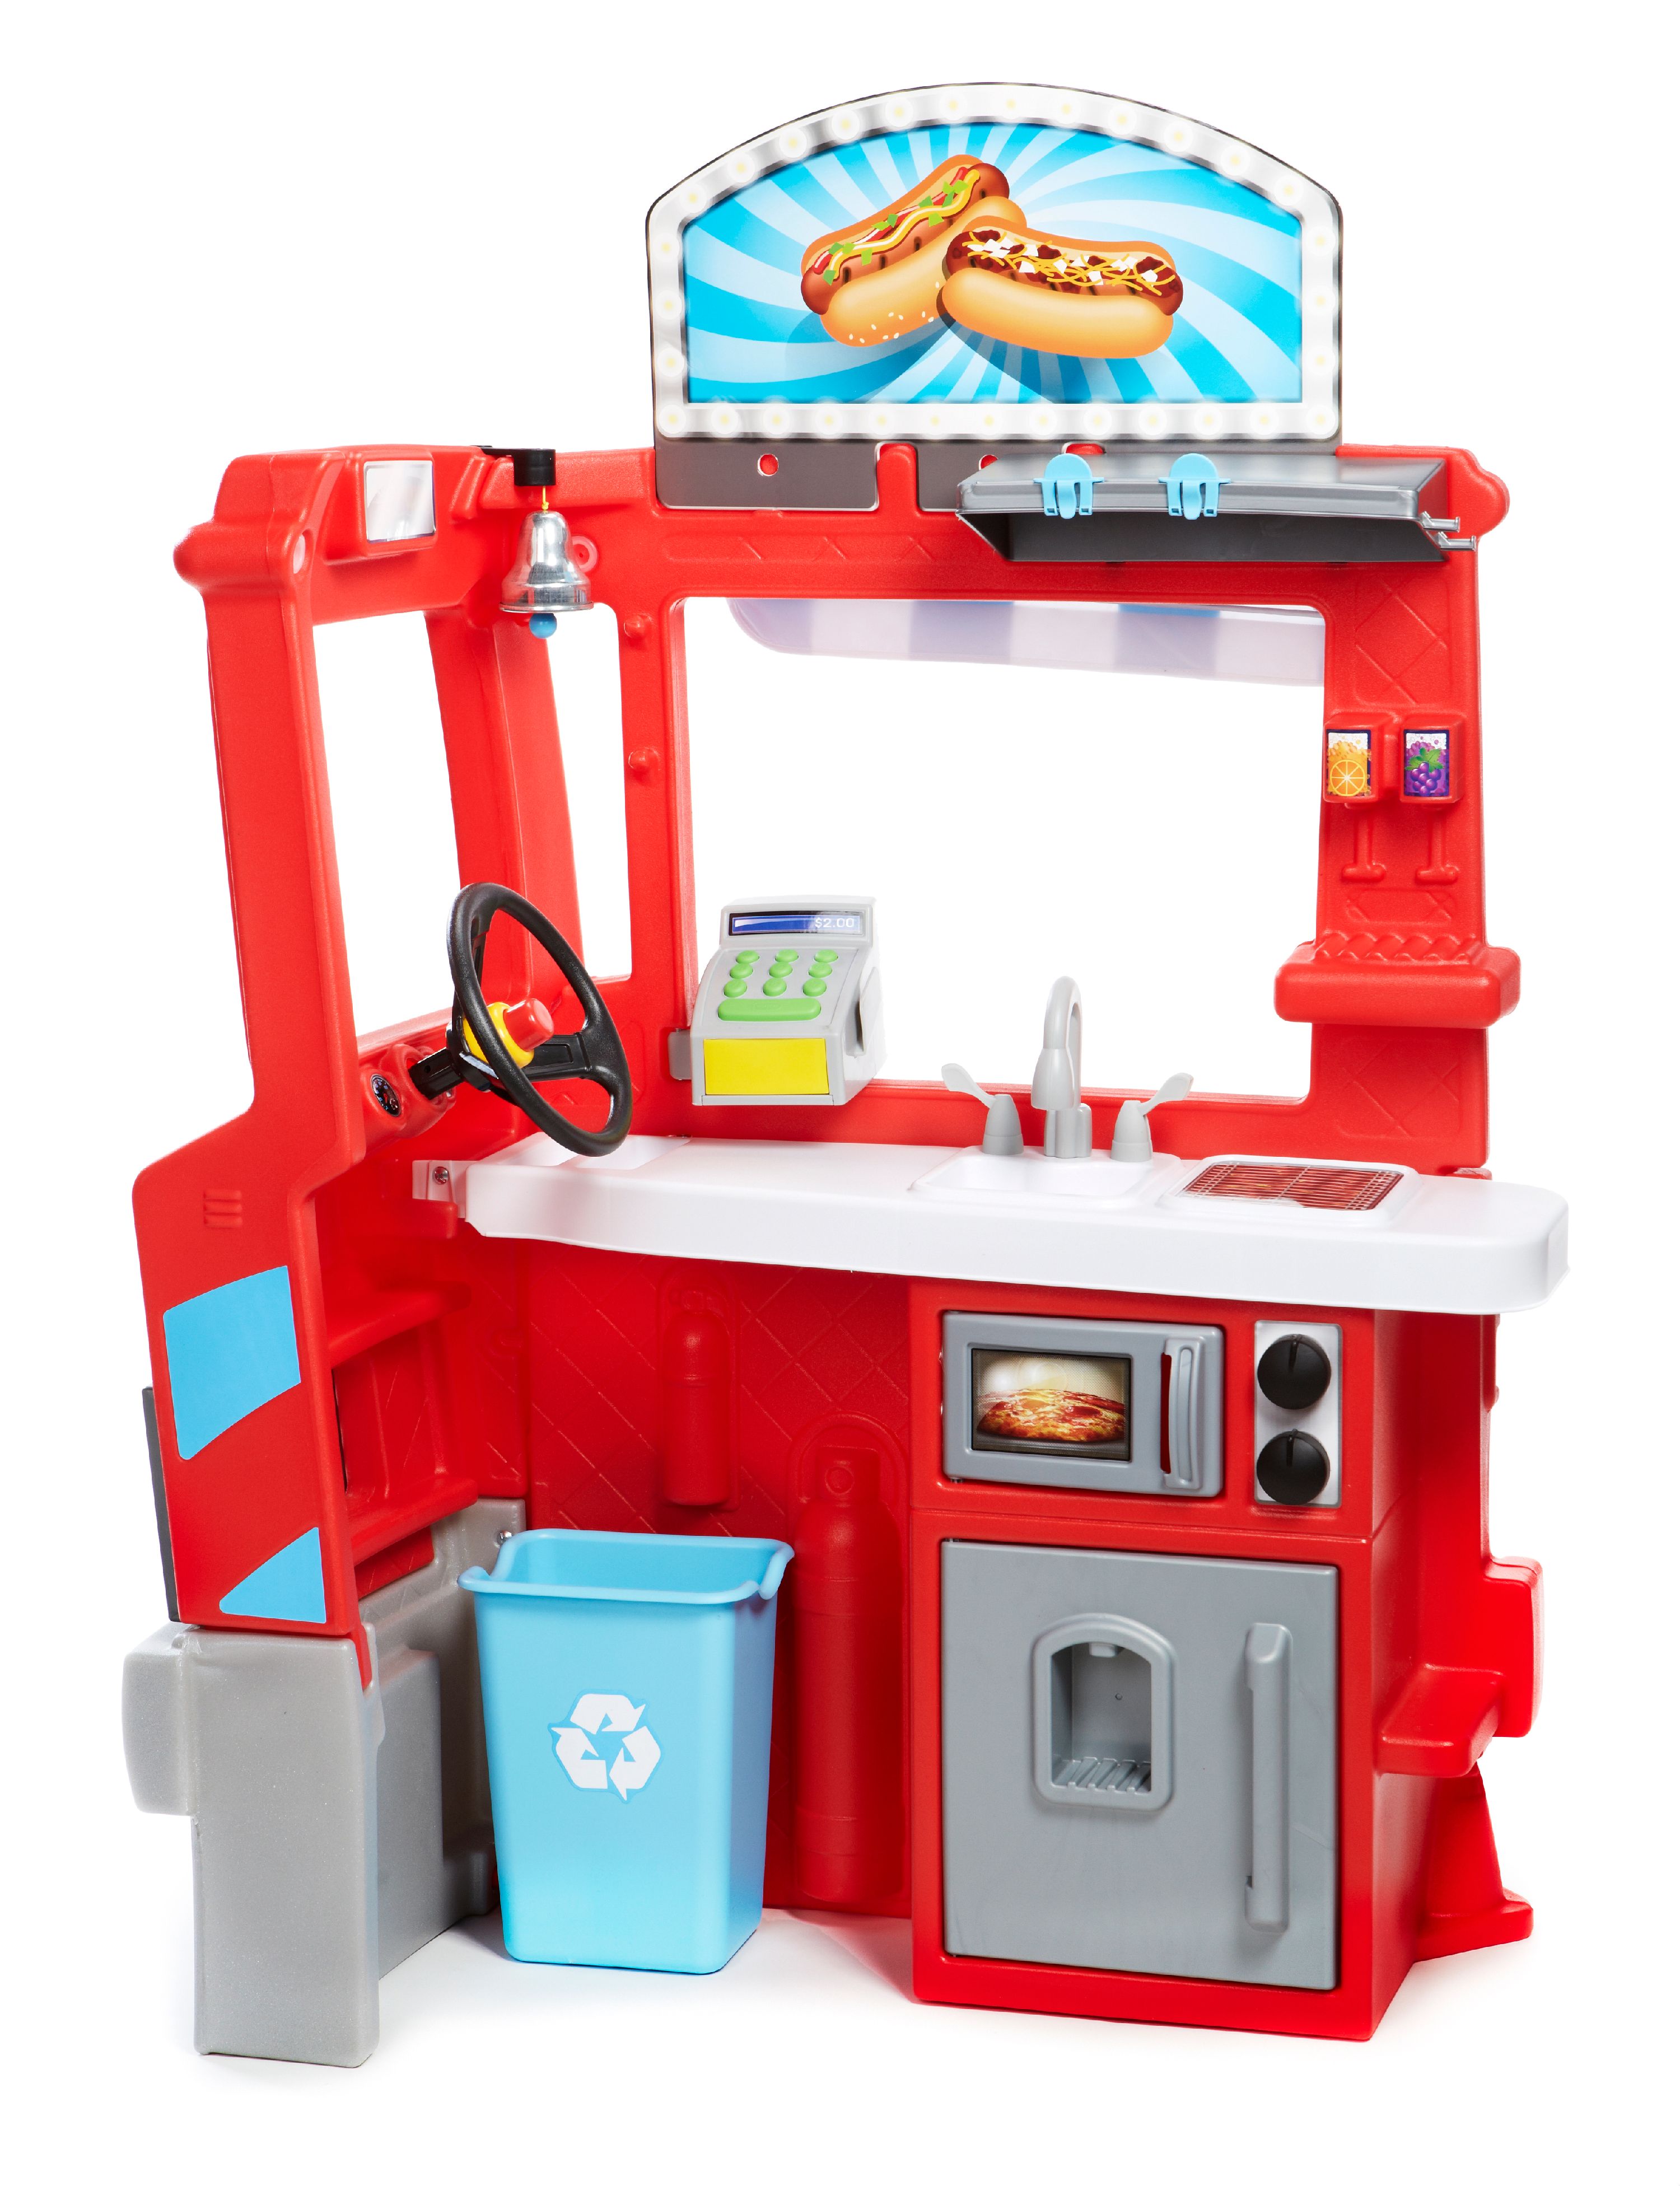 Little Tikes 2-in-1 Truck Play Food with 40+ Piece Accessory Set - image 3 of 9